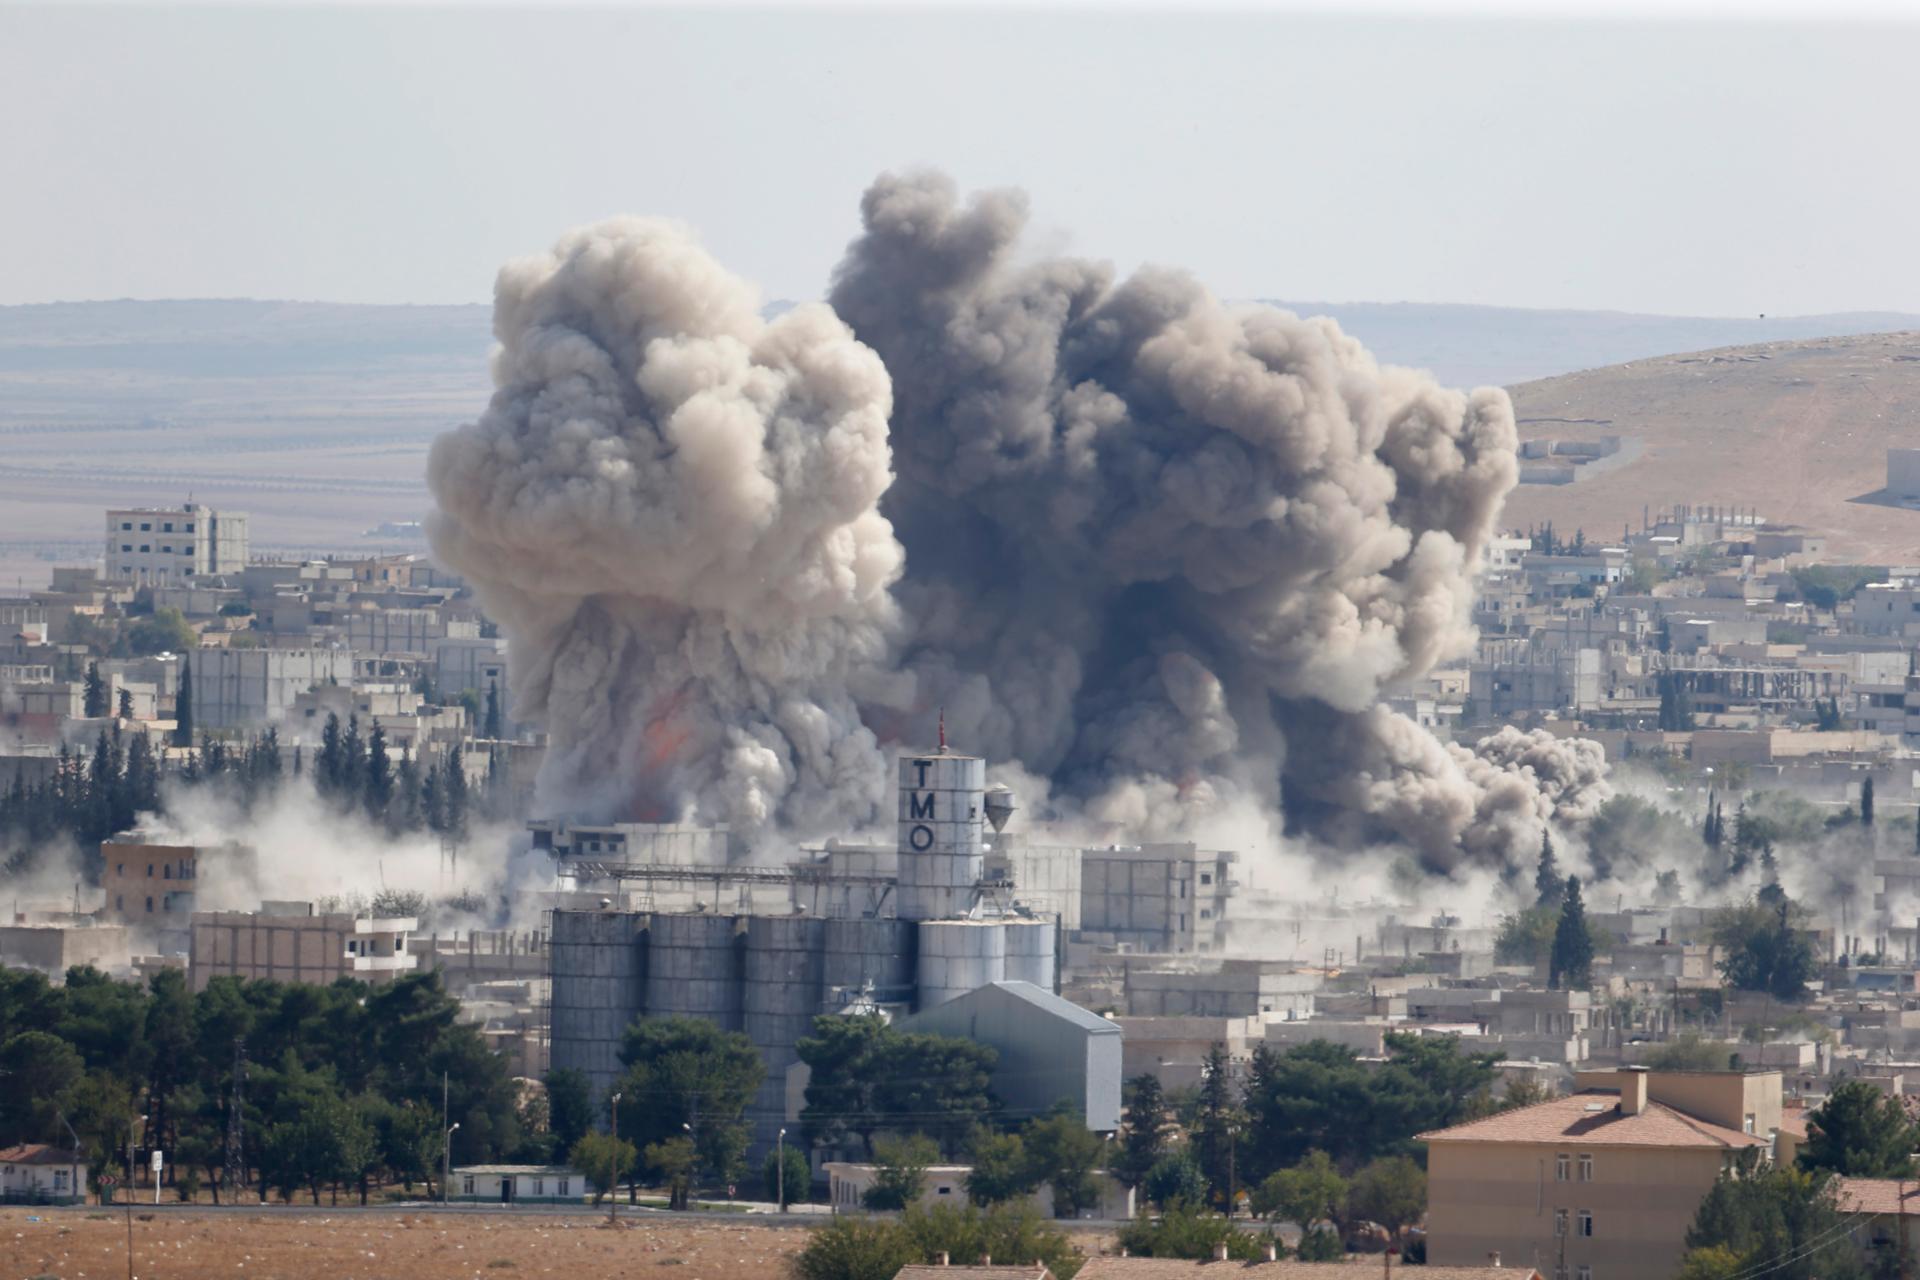 Smoke rises after a US-led air strike in the Syrian town of Kobane on October 8, 2014.